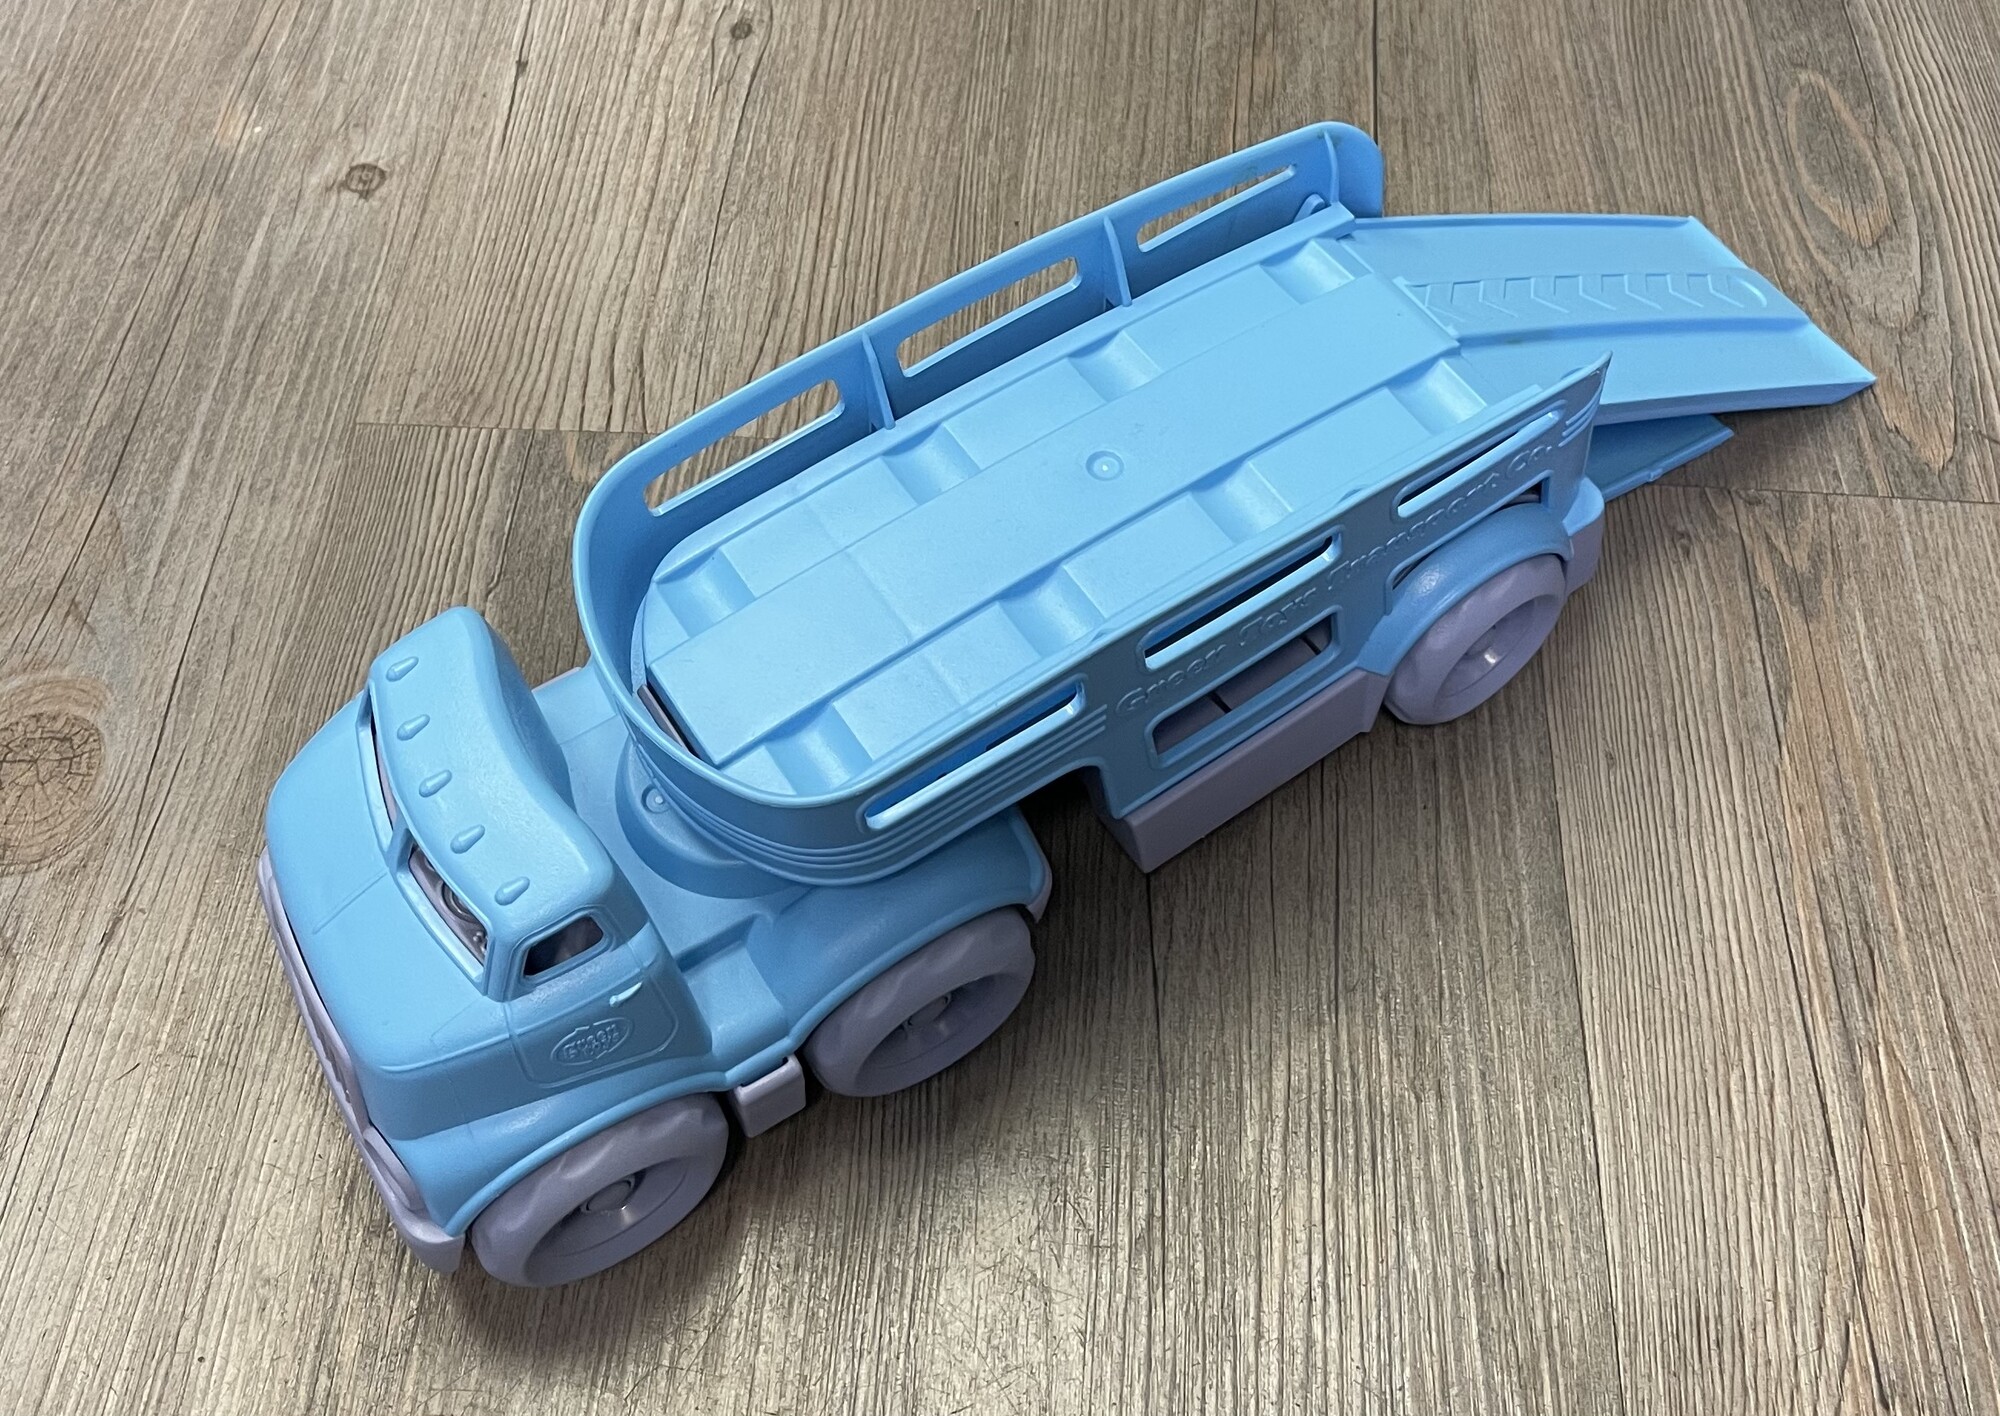 Green Toys Car Carrrier, Blue, Size: 3Y
Does not include cars.